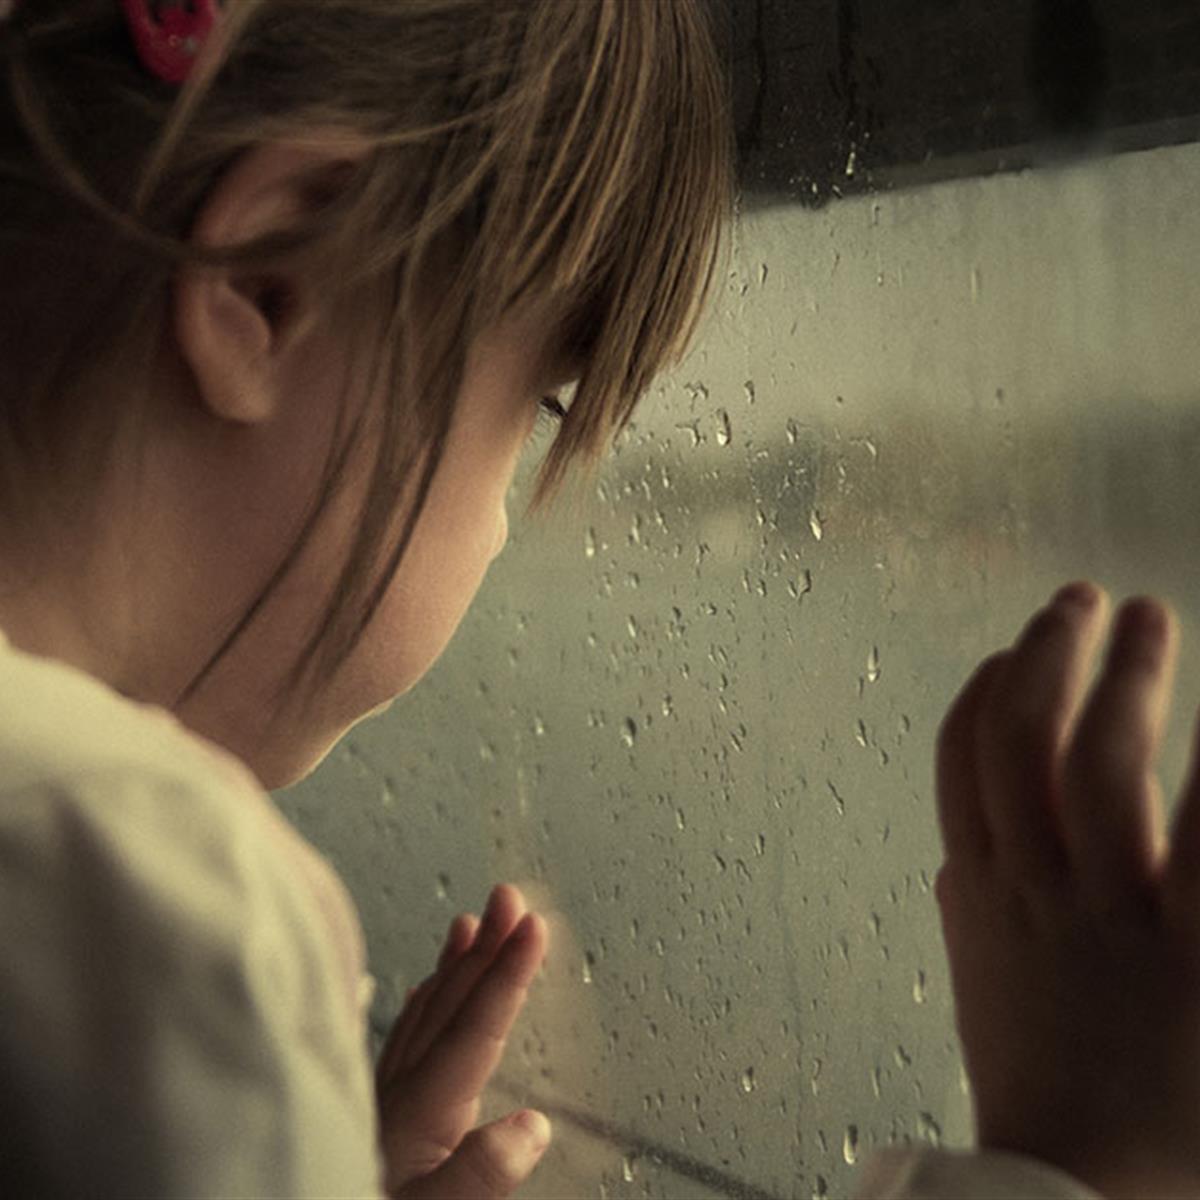 Anal Abused Girl - Child Abuse and Neglect: What Parents Should Know - HealthyChildren.org